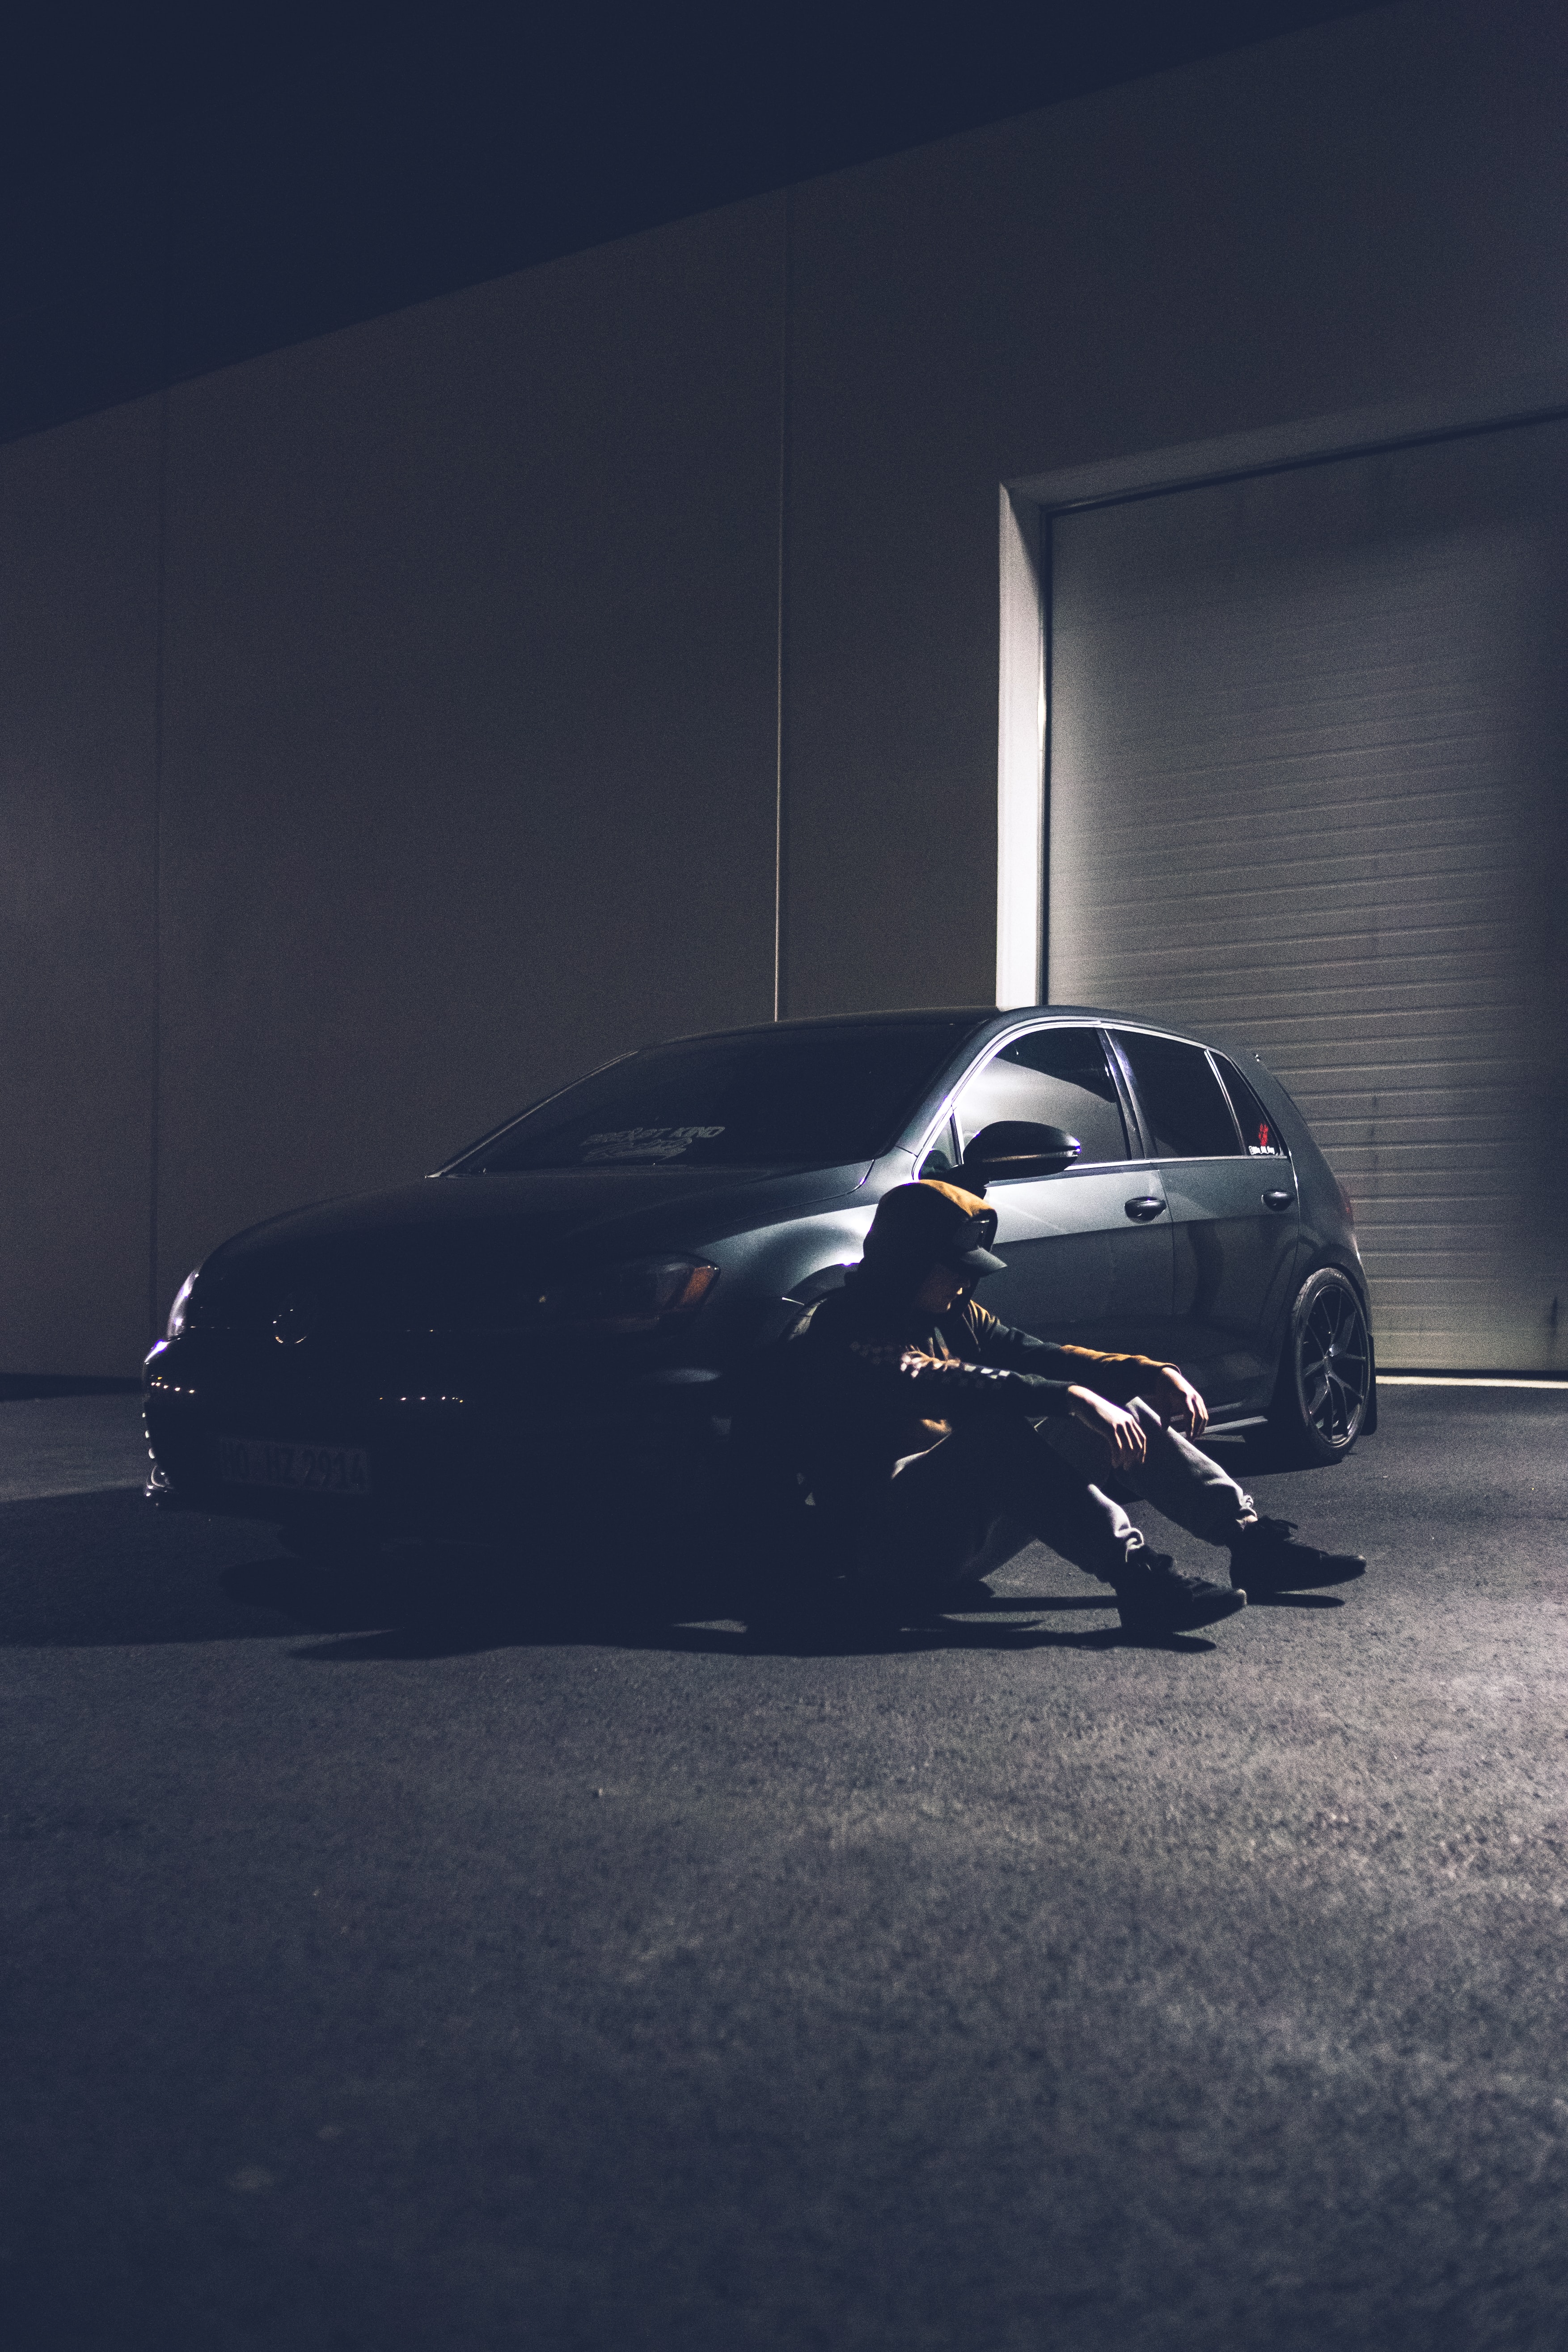 loneliness, sadness, alone, cars, car, machine, cap, lonely, sorrow 2160p